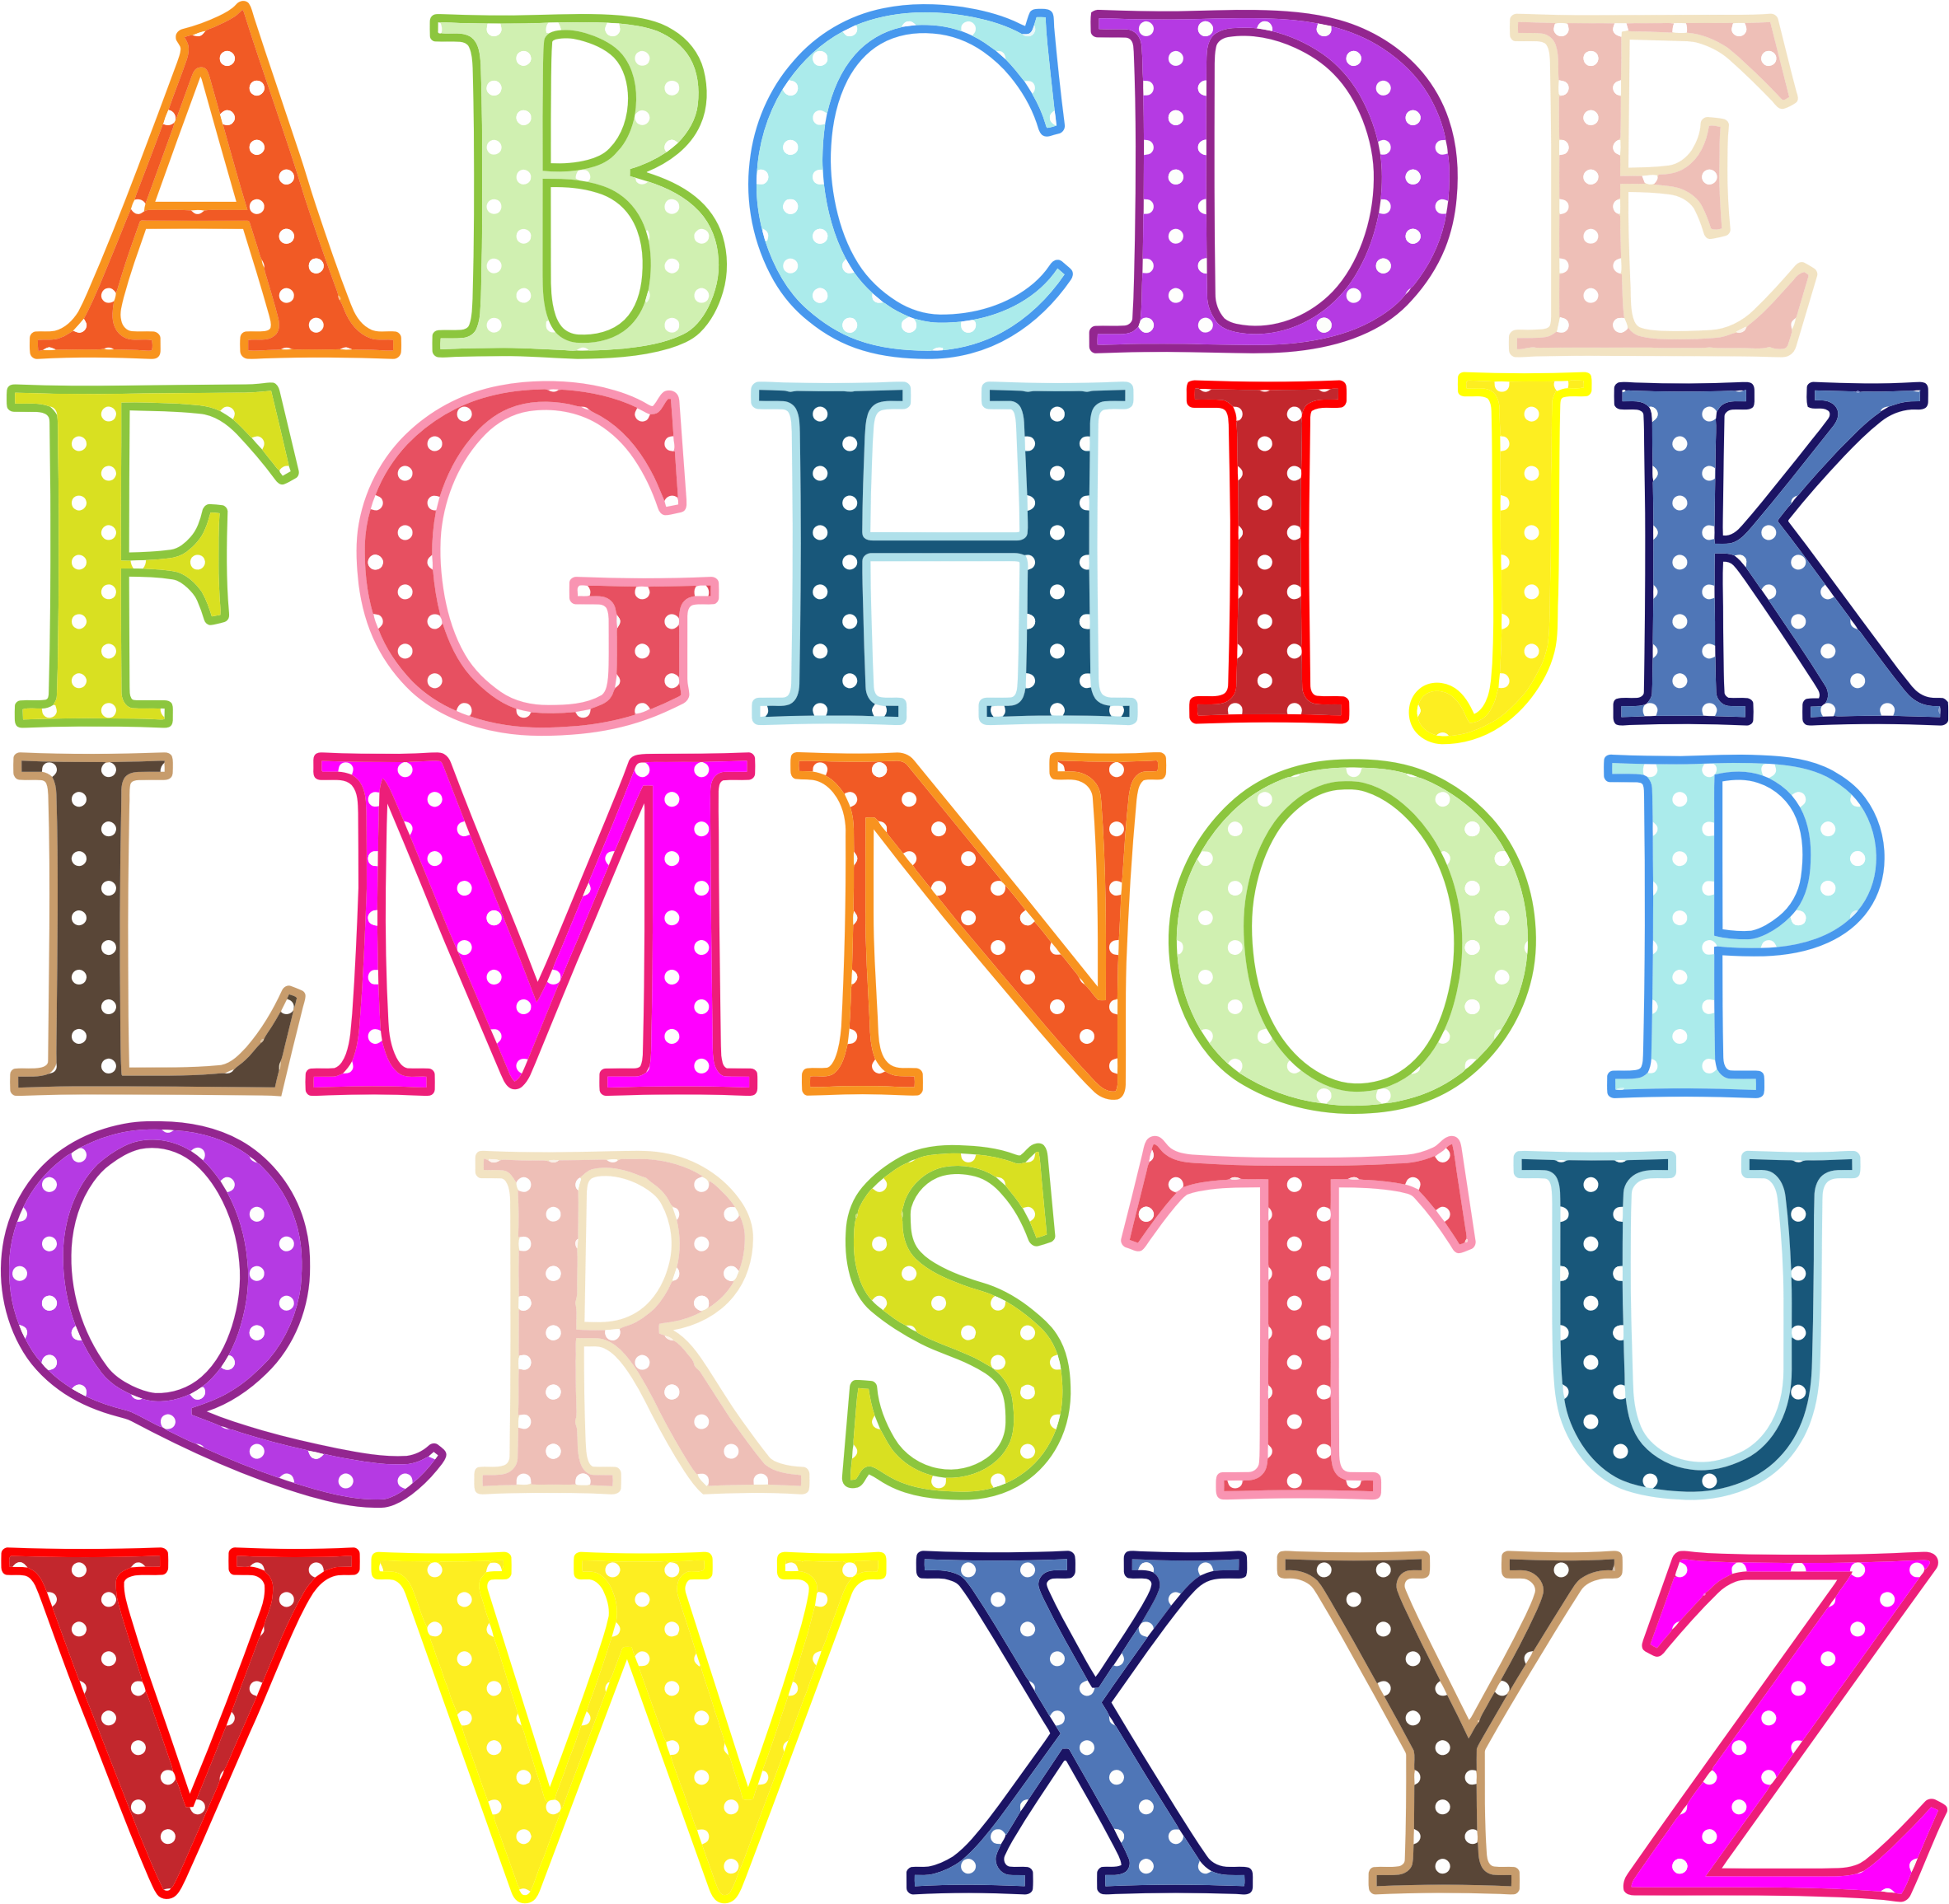 List 92+ Images letters with pictures on them Latest